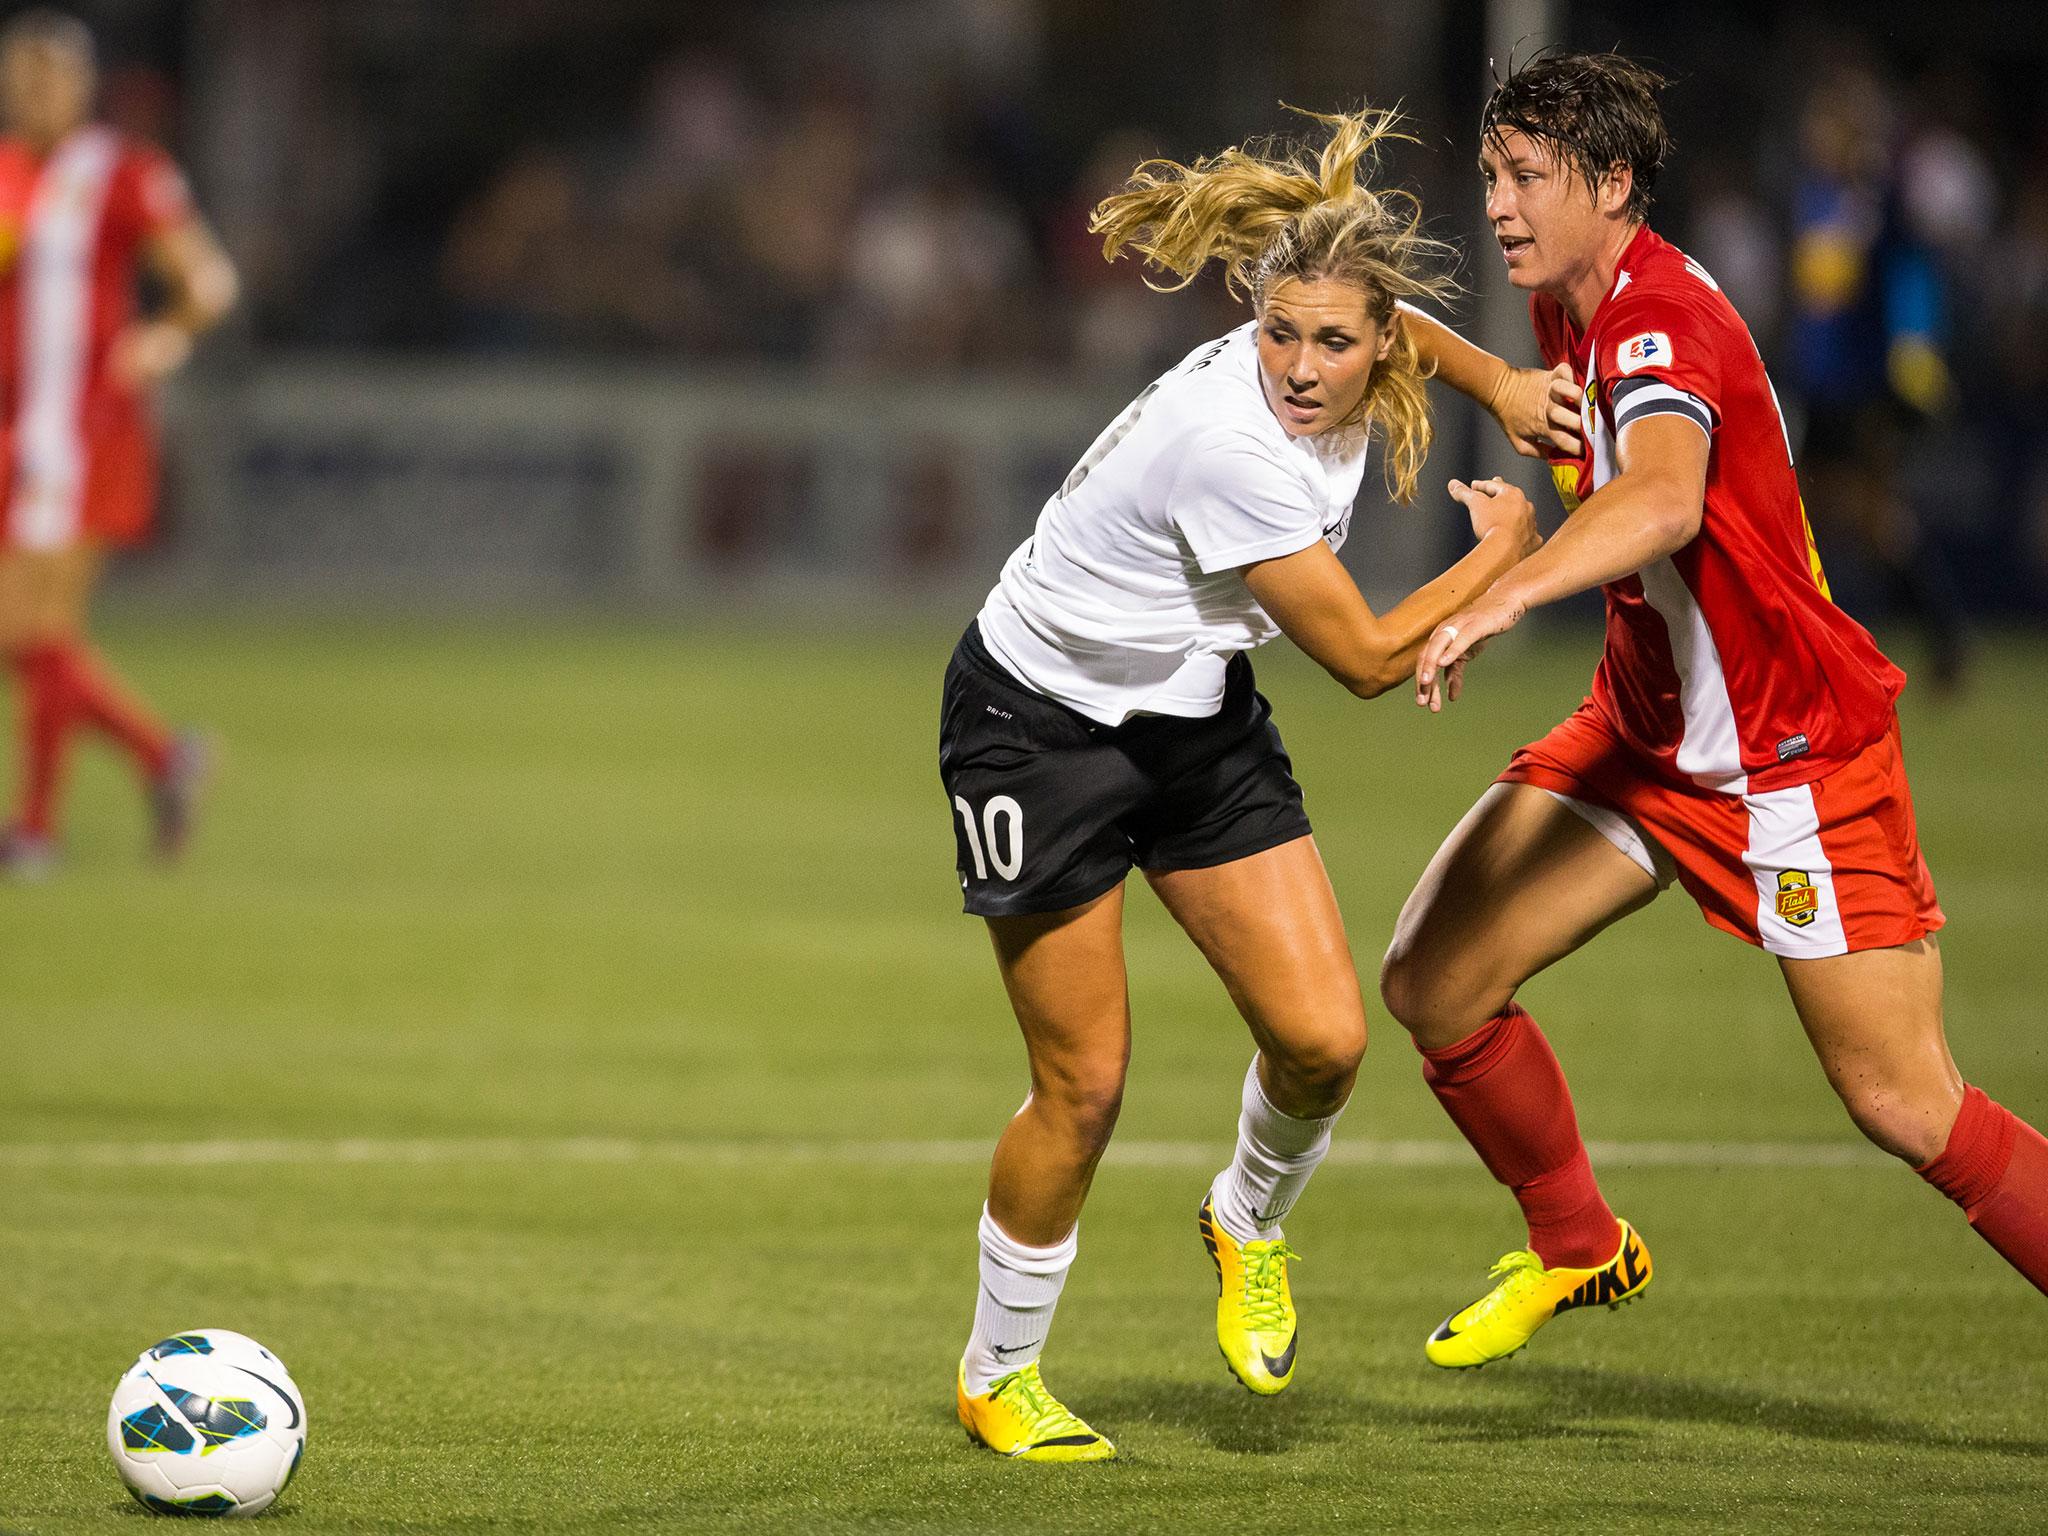 Last year's final was won by New York Western Flash, since rebranded as North Carolina Courage